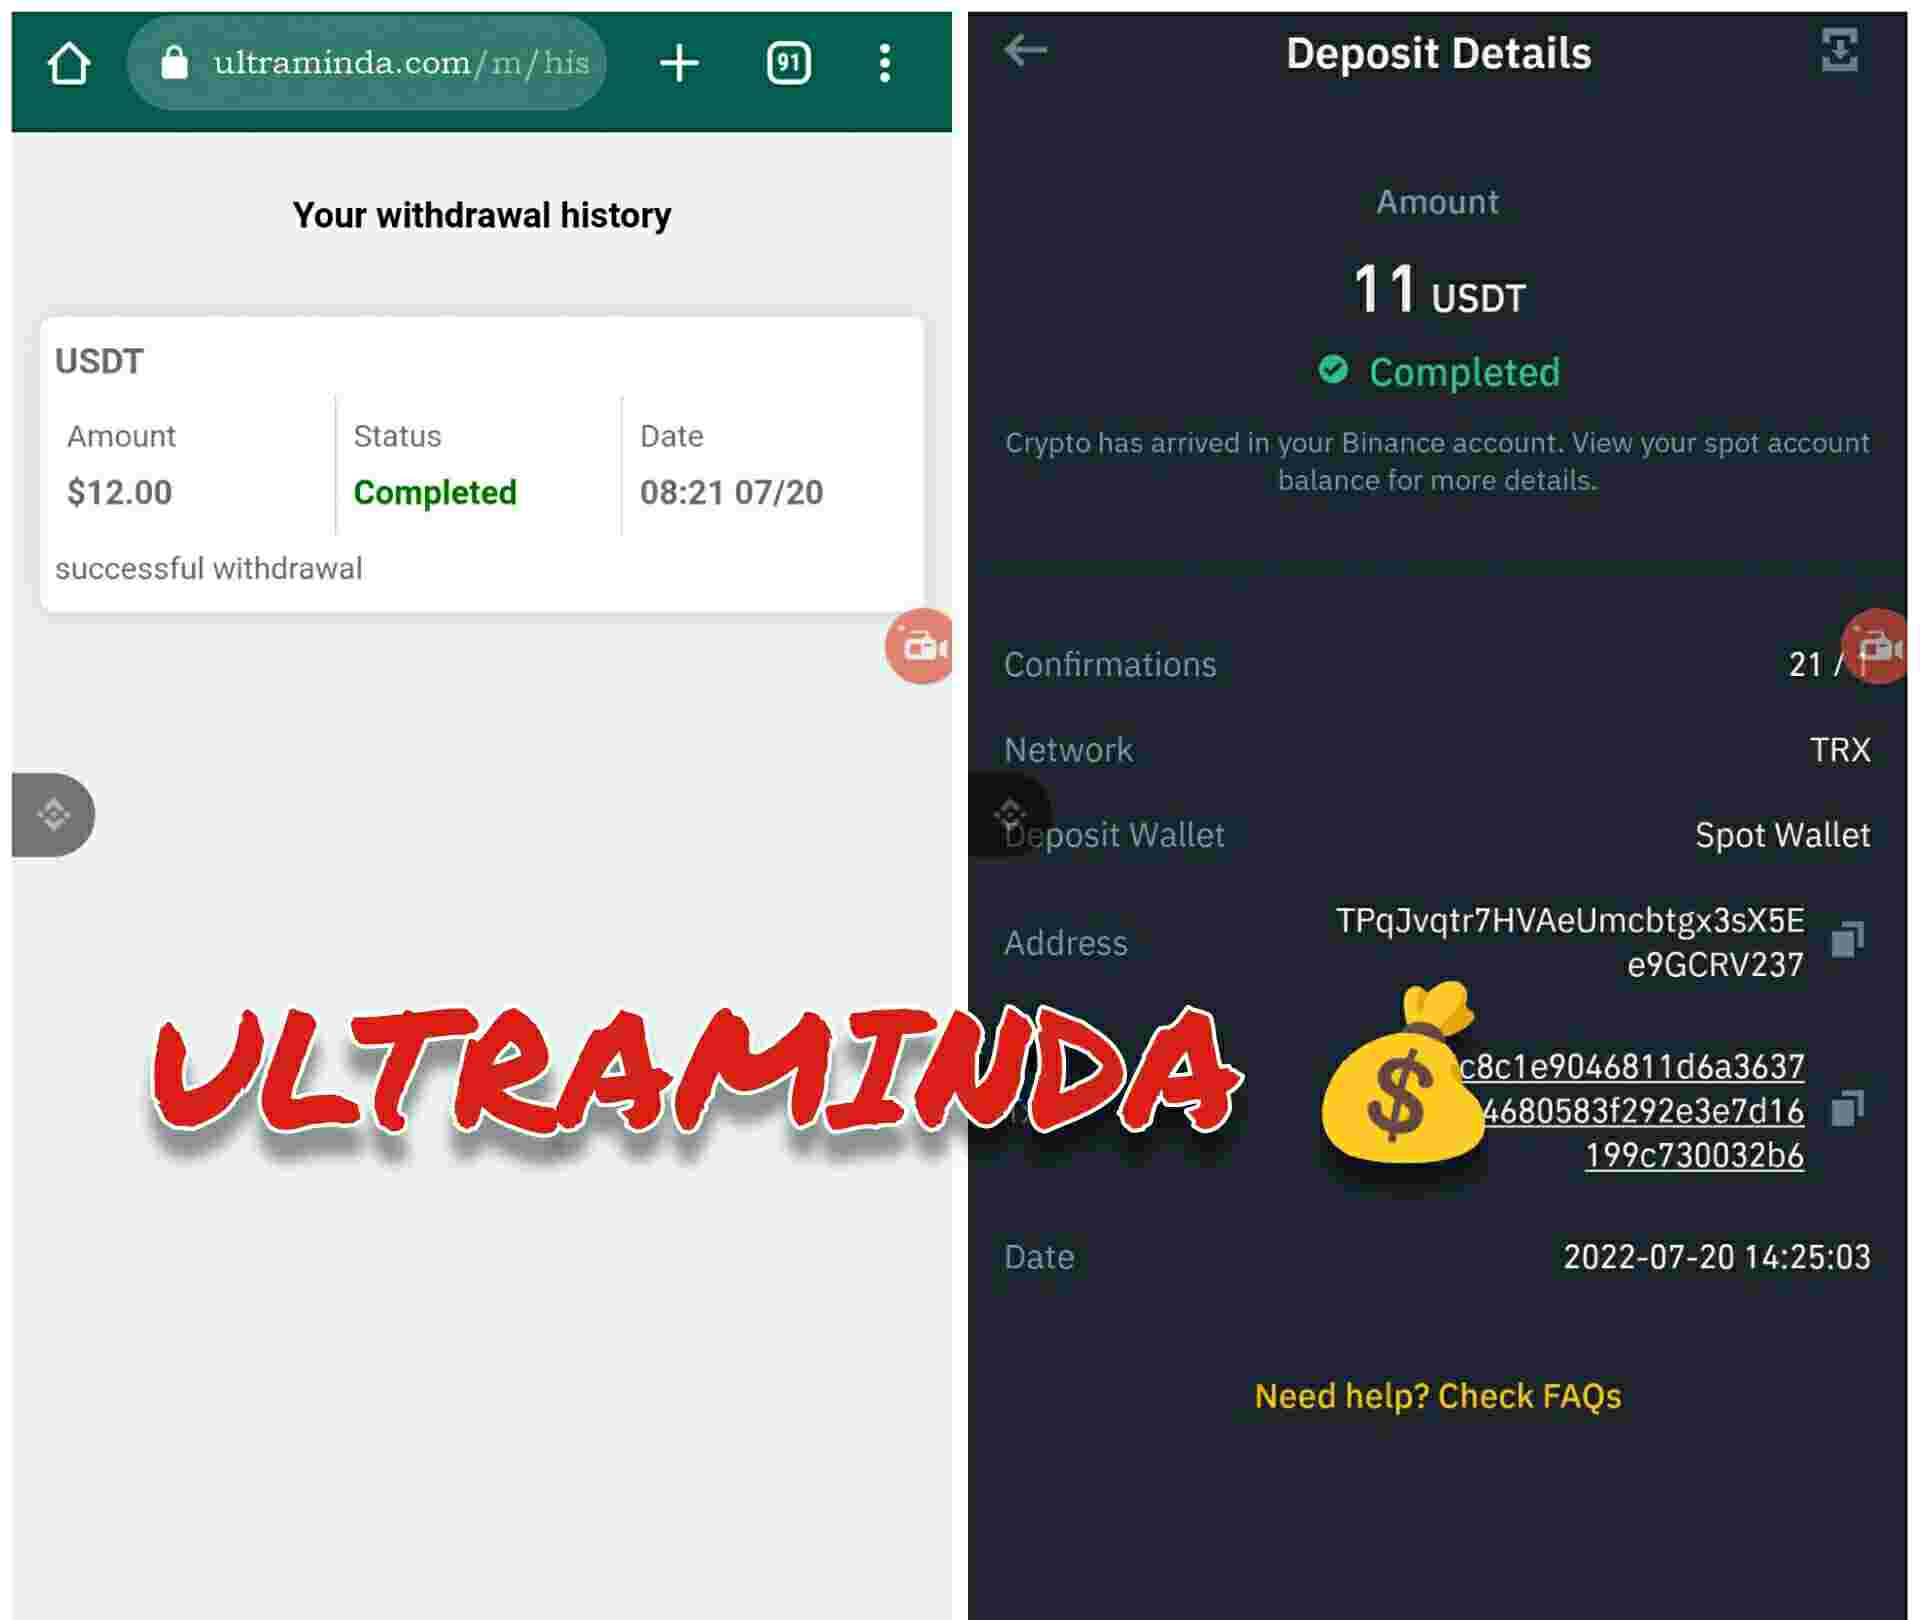 This is a legit uktra minda withdraw proof, ultraminda payment proof or ultraminda.com withdrawal evidence